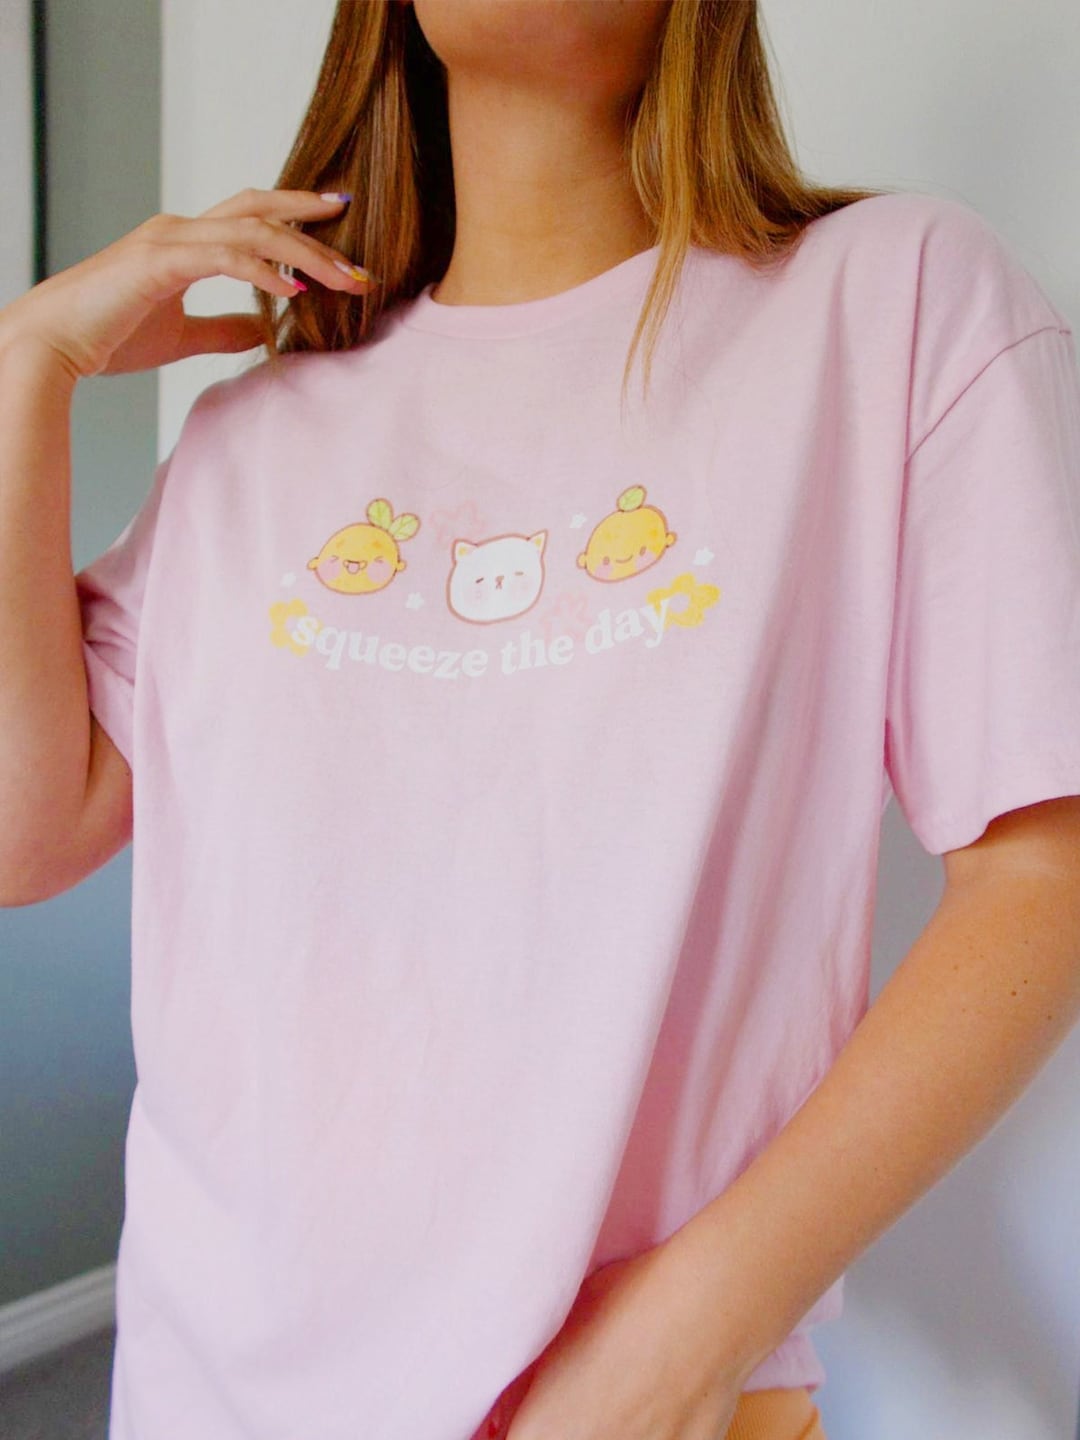 Squeeze the Day Kawaii Pink T-shirt Cute Pastel Pink - Etsy